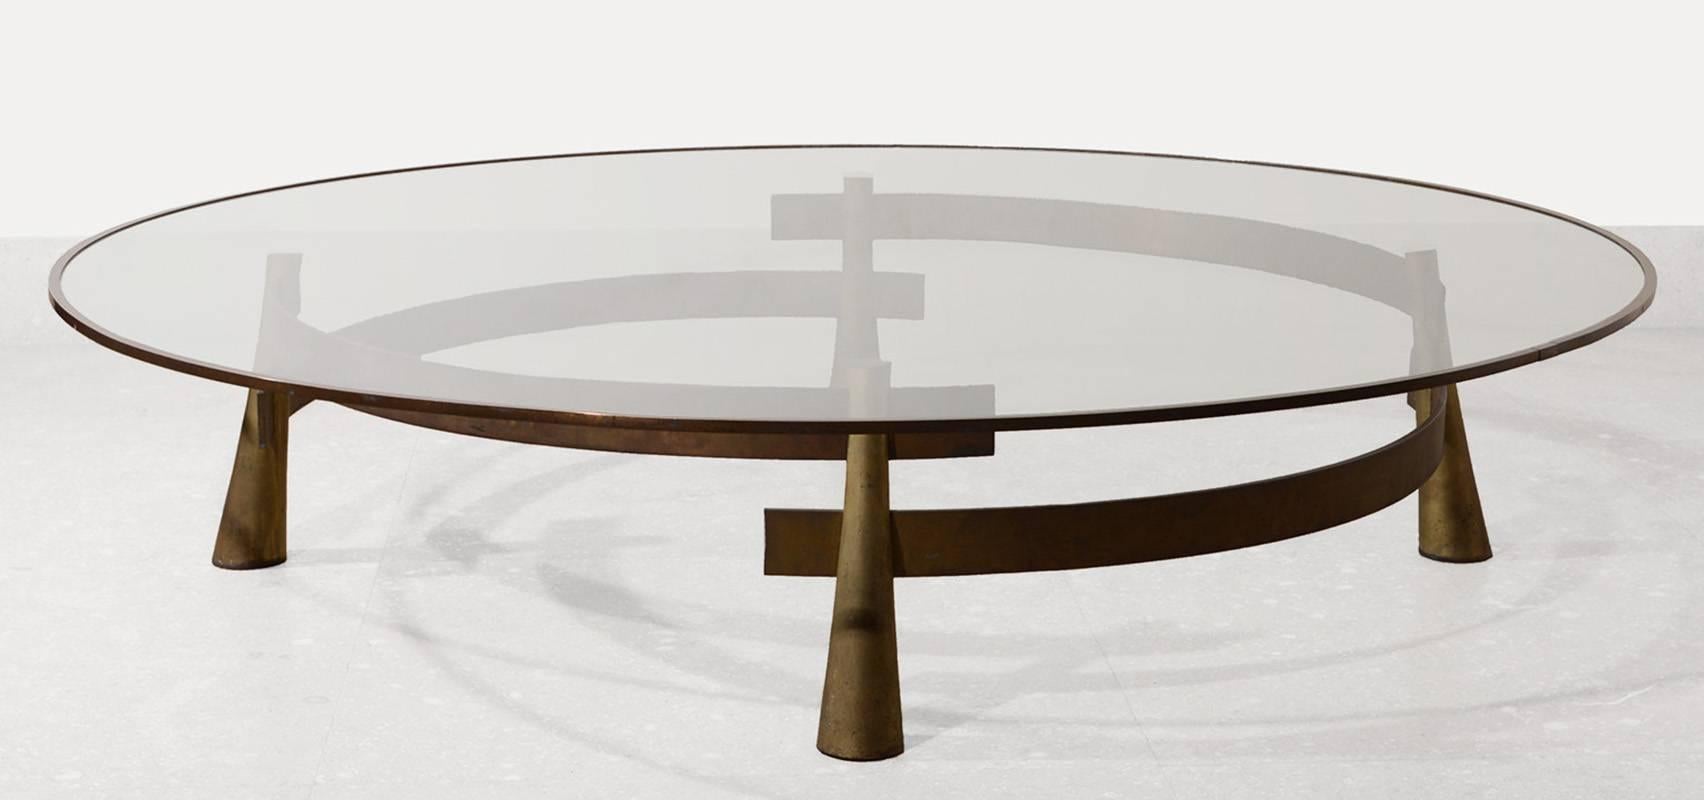 Rare vintage Tao coffee table shown in metal and brass finish with glass top.